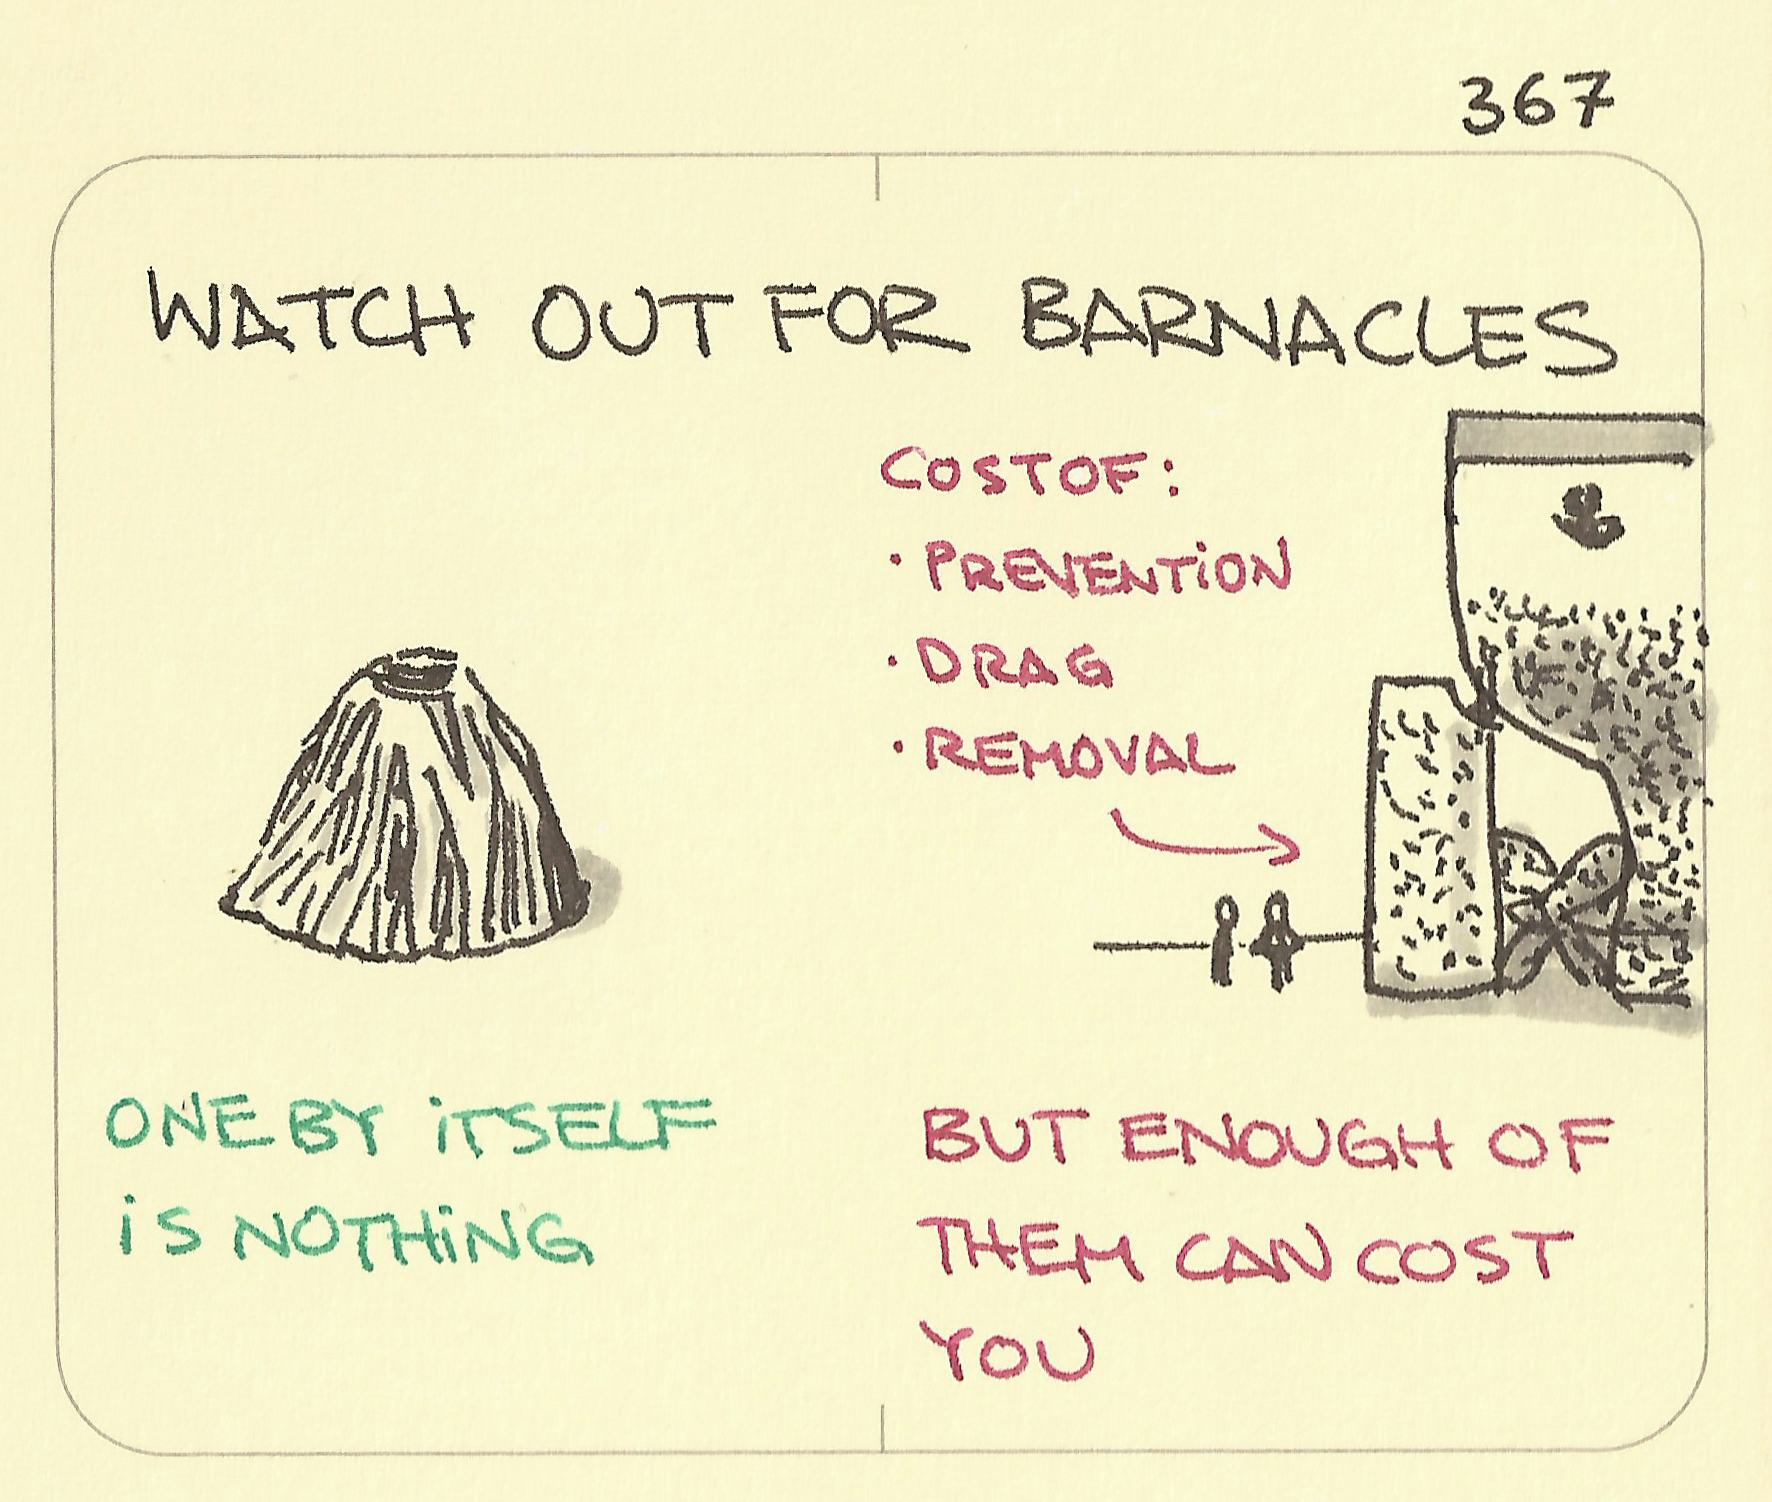 Watch out for barnacles - Sketchplanations